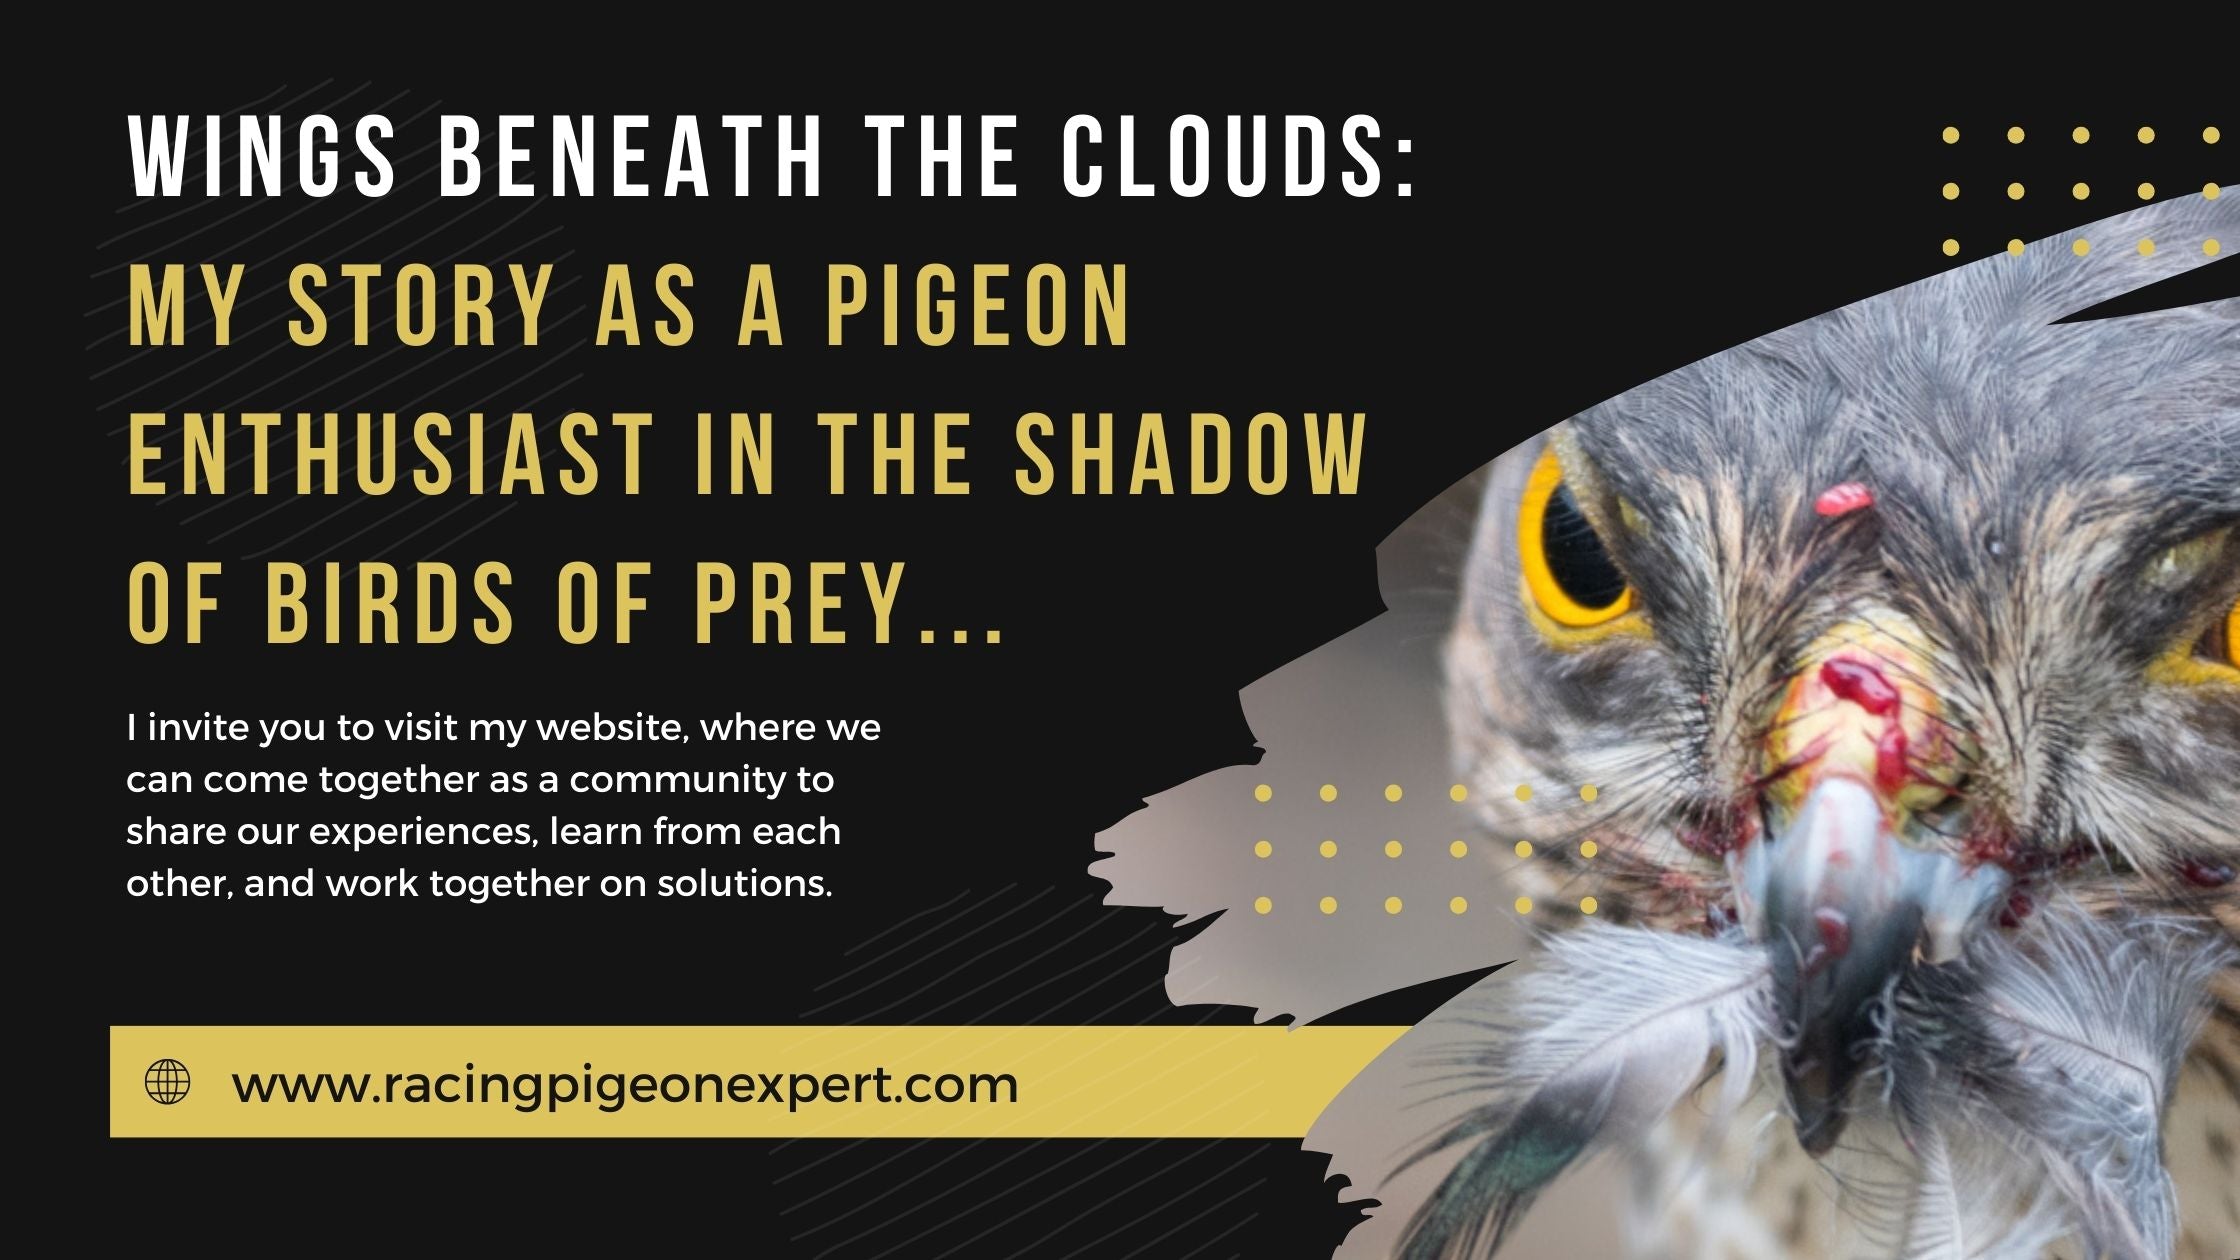 Wings Beneath the Clouds: My Story as a Pigeon Enthusiast in the Shadow of Birds of Prey